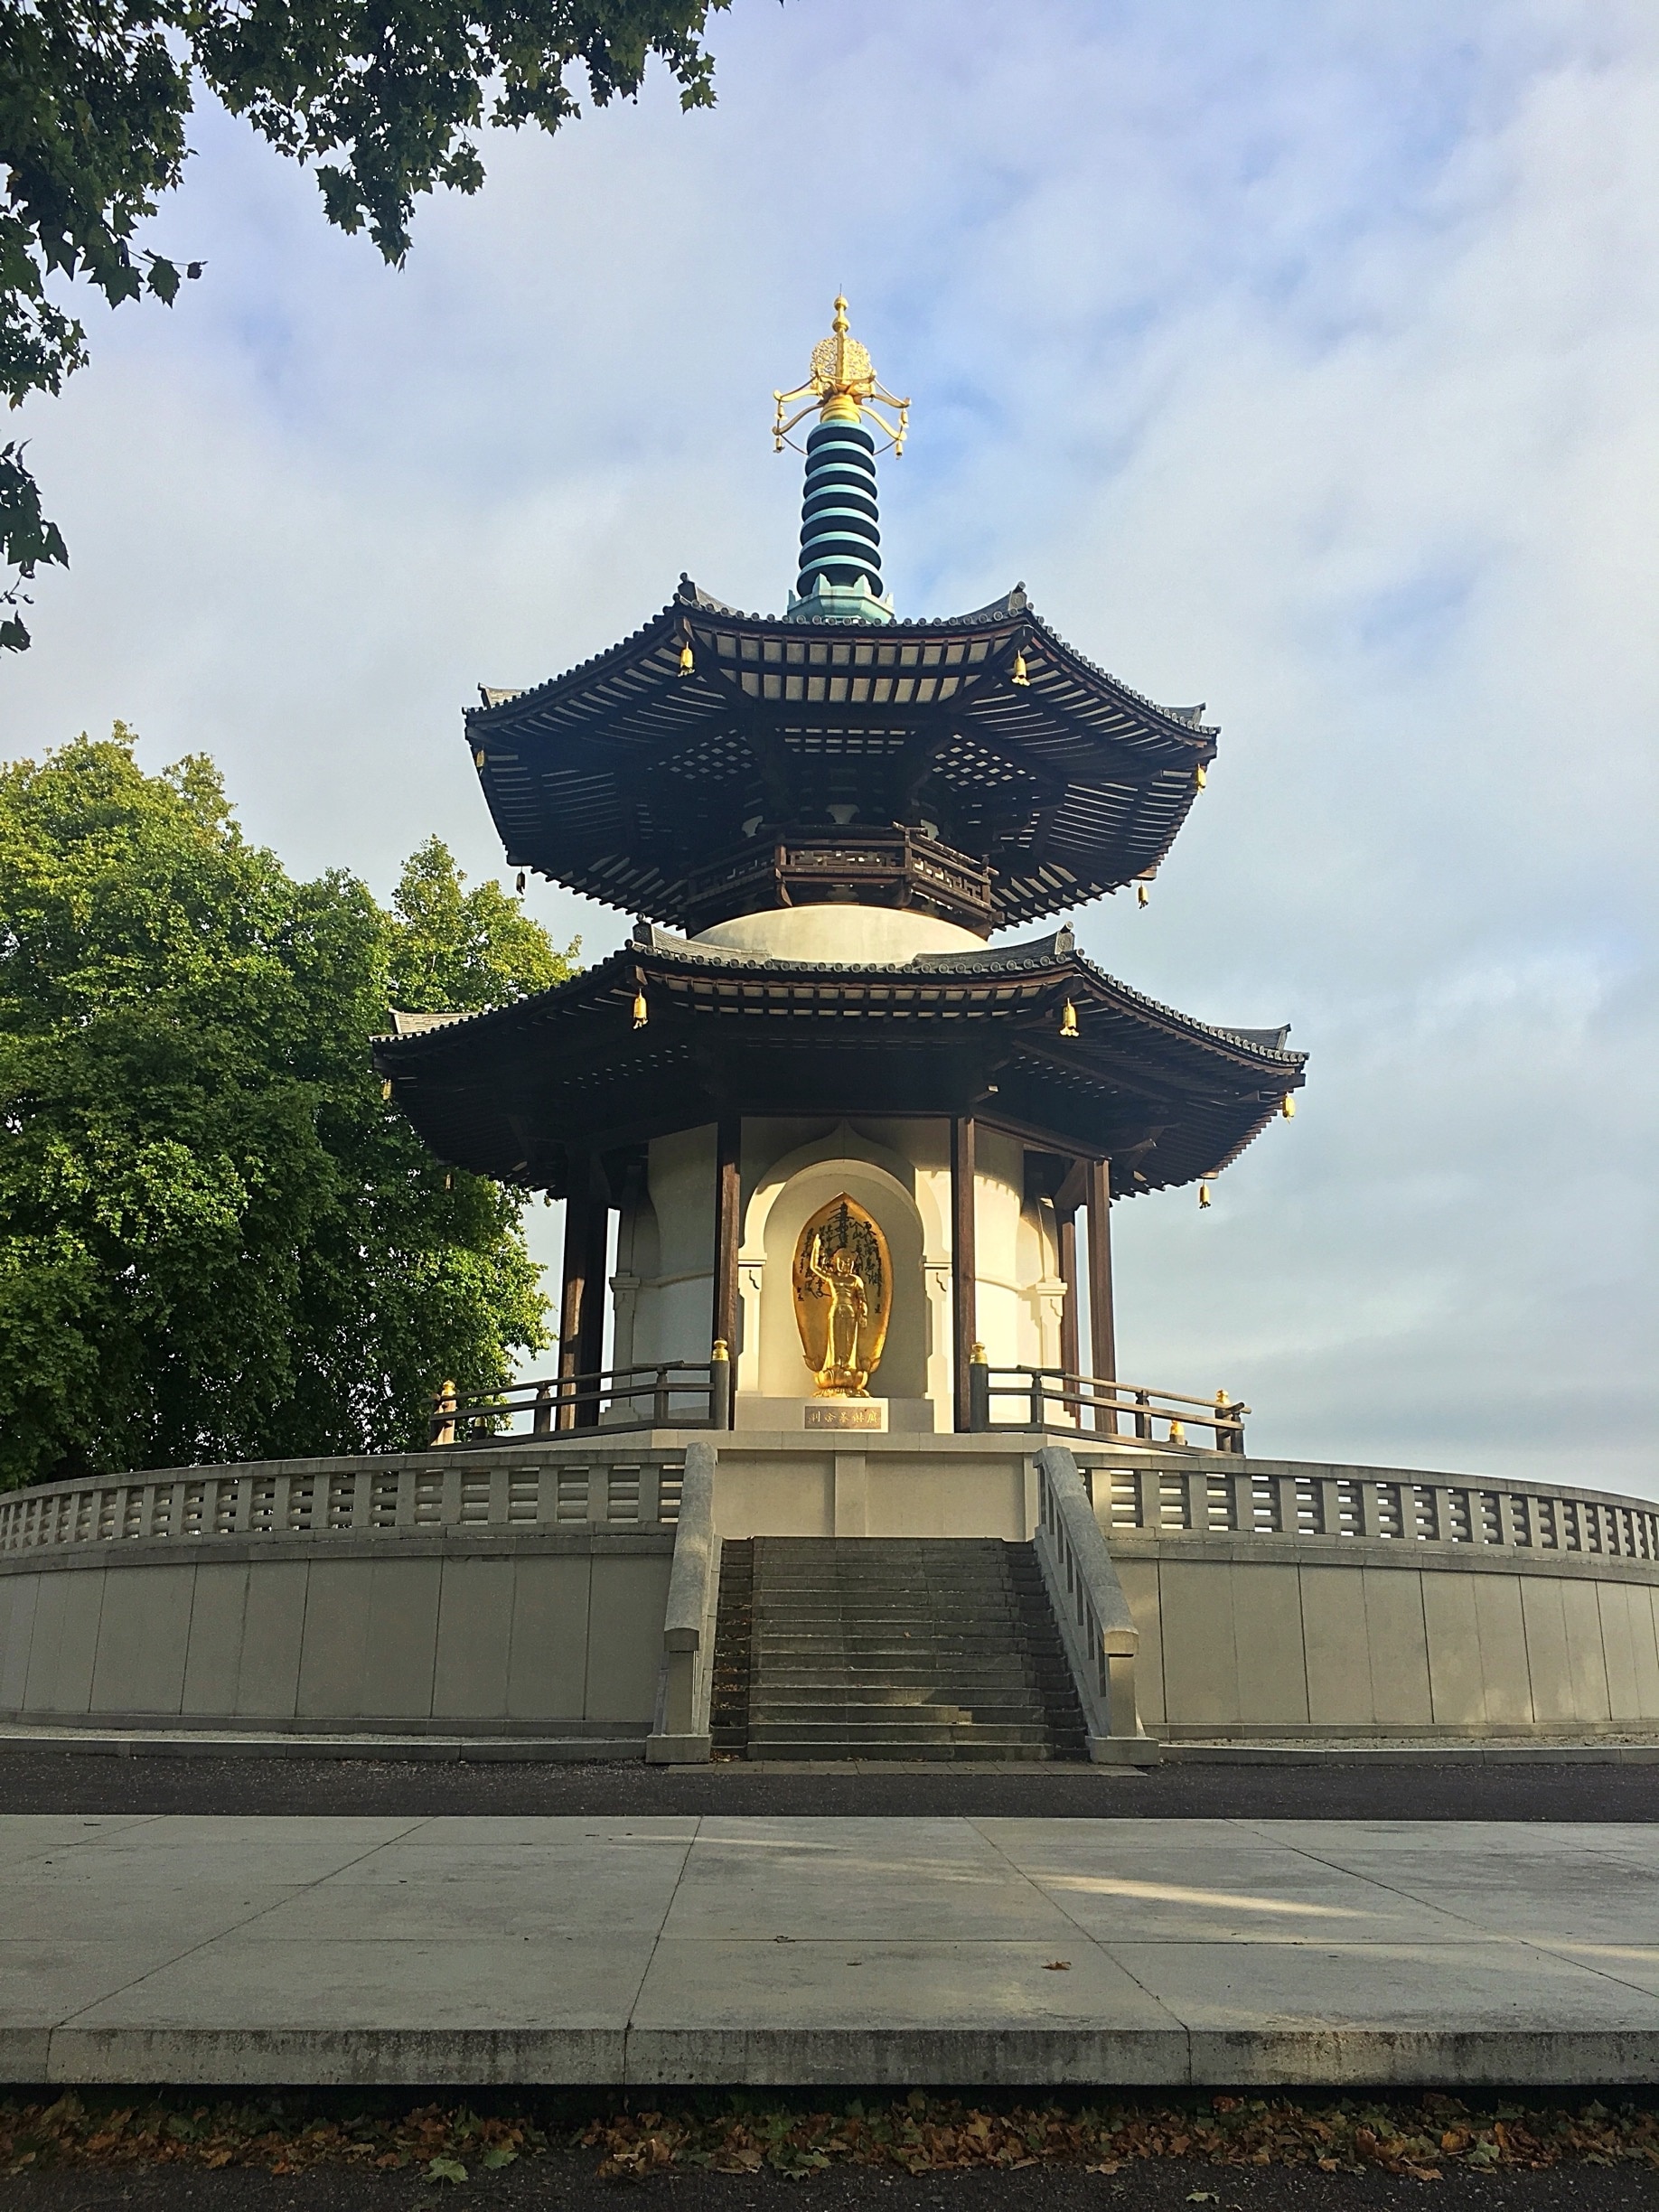 London Peace Pagoda at Battersea Park, London. Very tranquil on a sunny autumnal morning 🍂